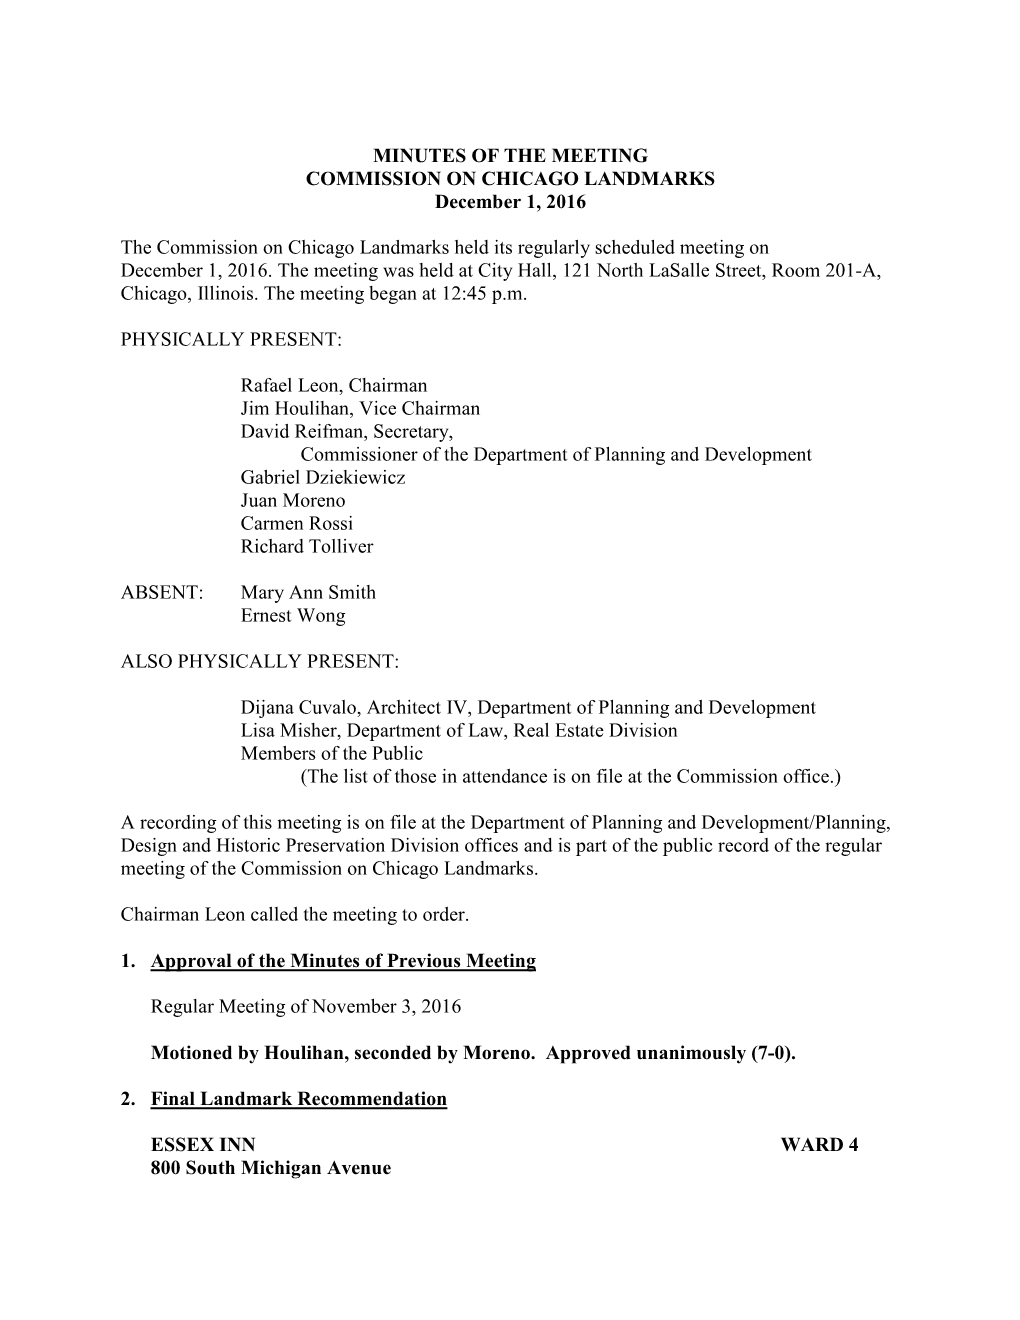 MINUTES of the MEETING COMMISSION on CHICAGO LANDMARKS December 1, 2016